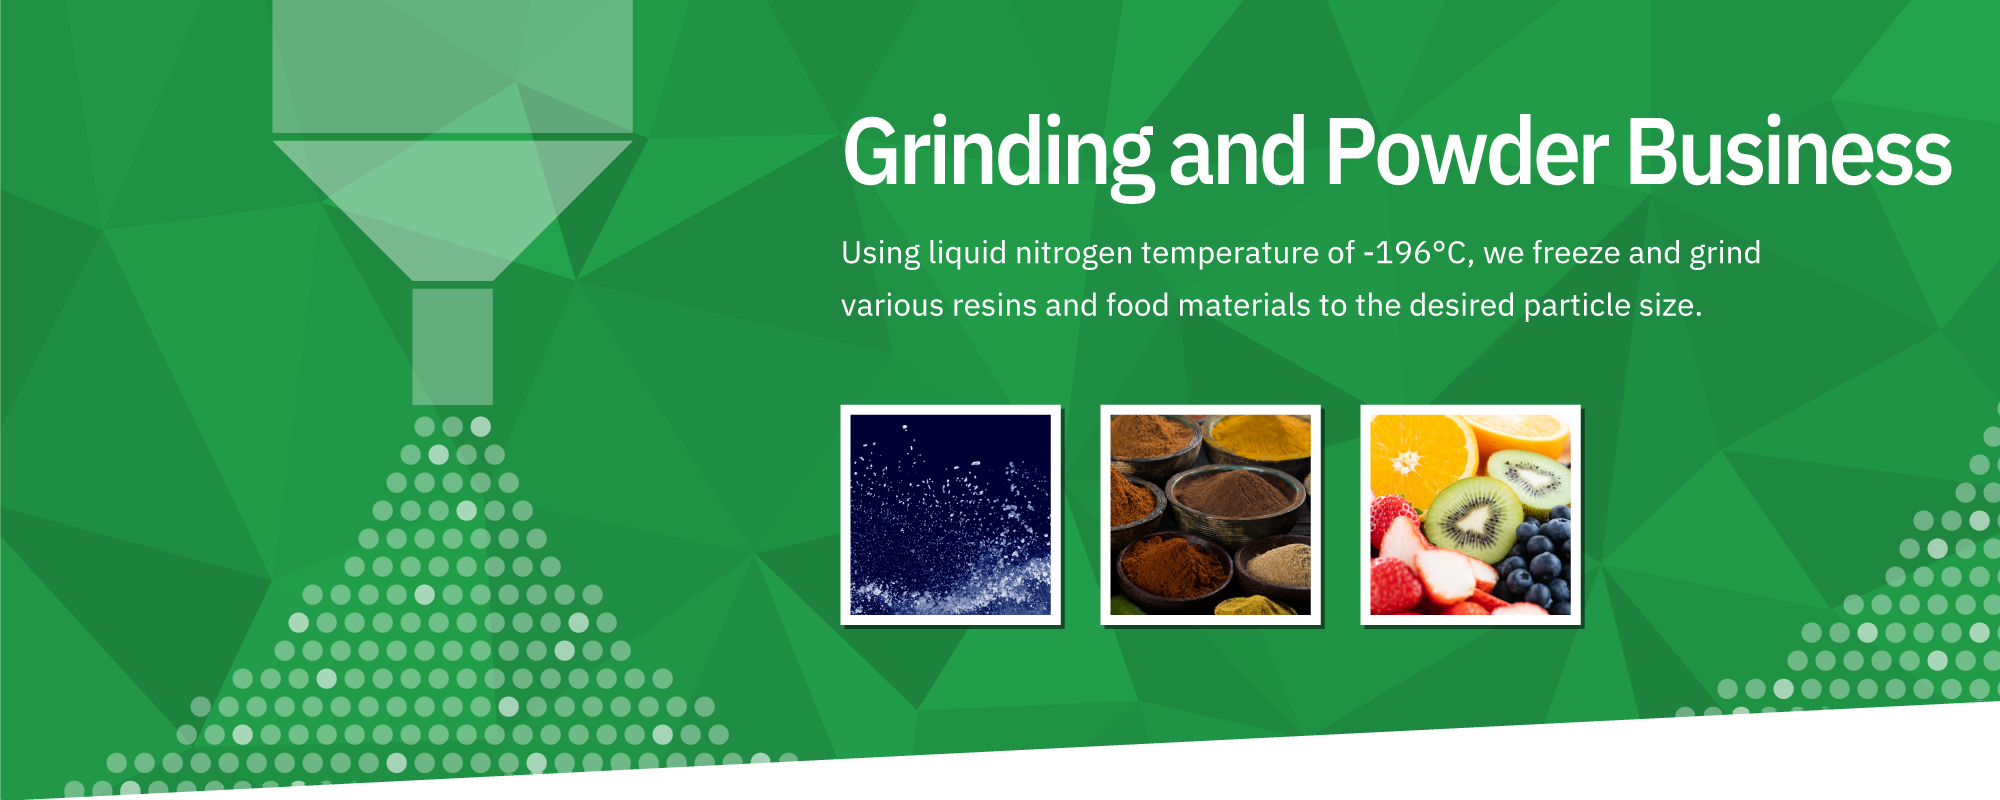 Grinding and Powder Business: Using liquefied nitrogen at a low temperature of -196°C, we freeze and grind various resins and food materials to the desired particle size.